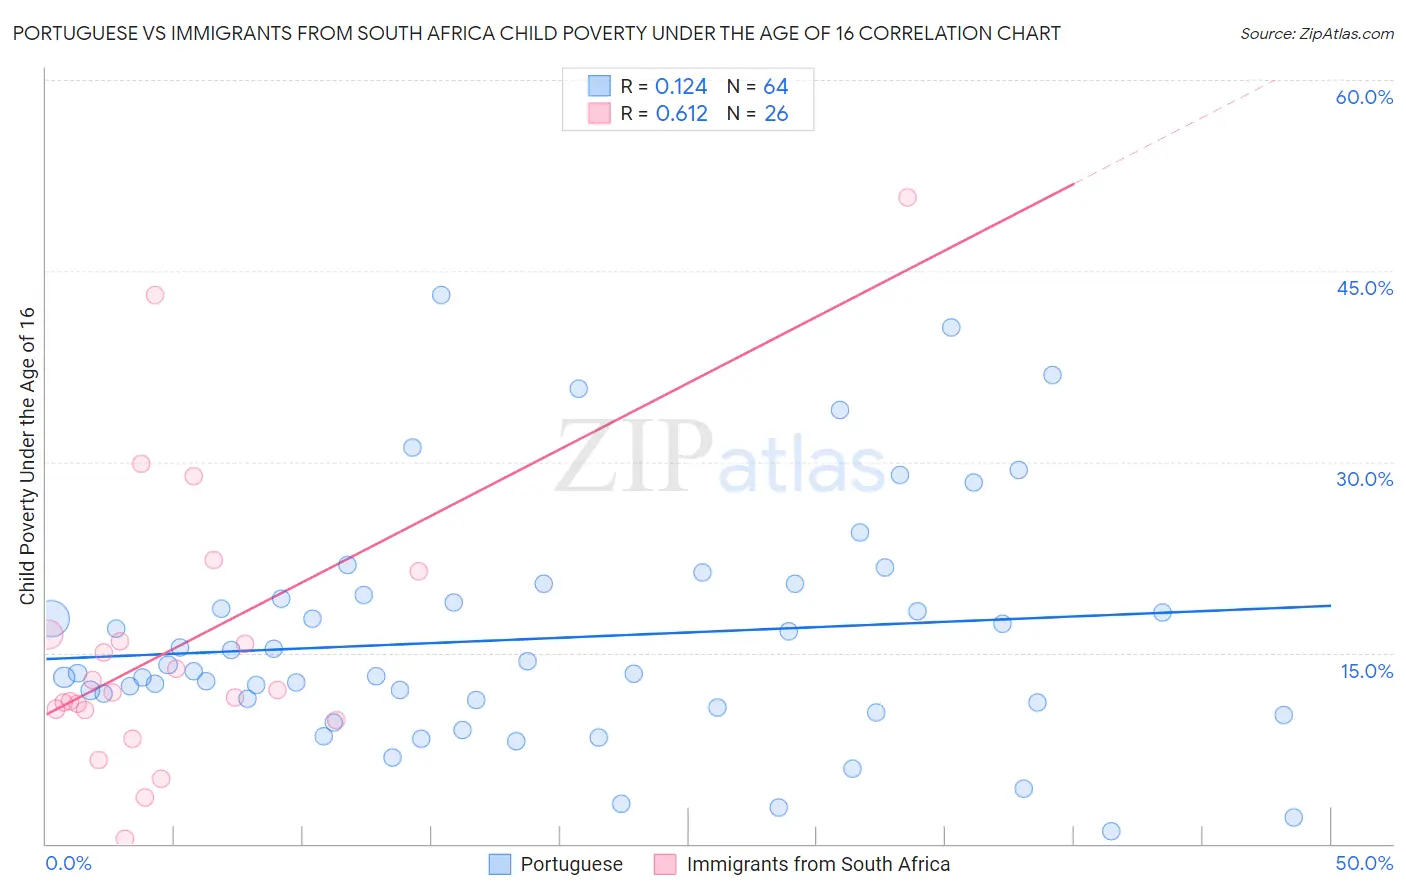 Portuguese vs Immigrants from South Africa Child Poverty Under the Age of 16